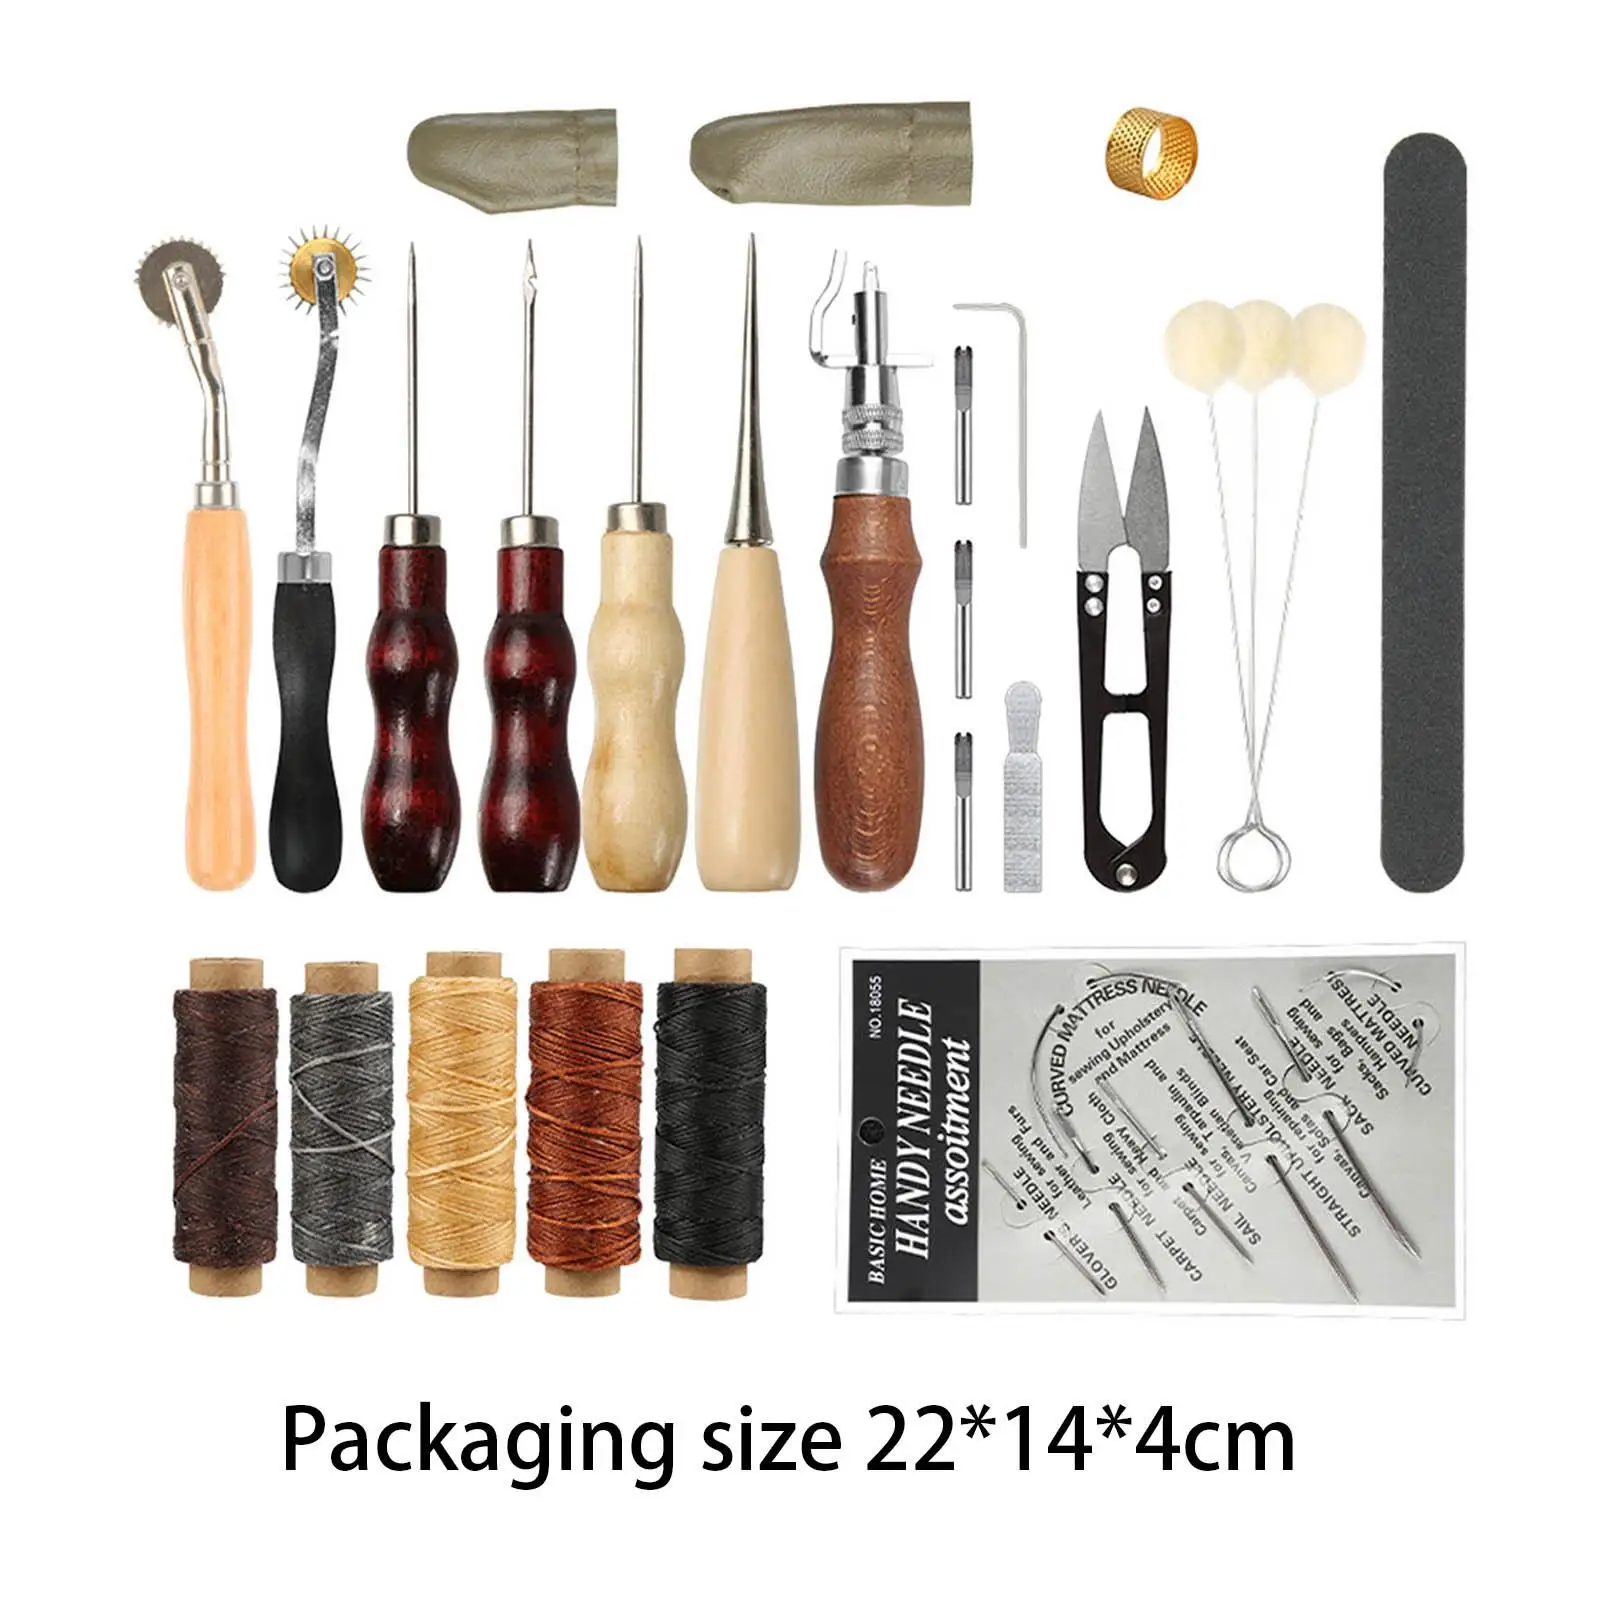 Leather Working Tools Set with 5 Color Waxed Thread Practical DIY Leather Crafting Tools and Supplies for Leather Craft Making